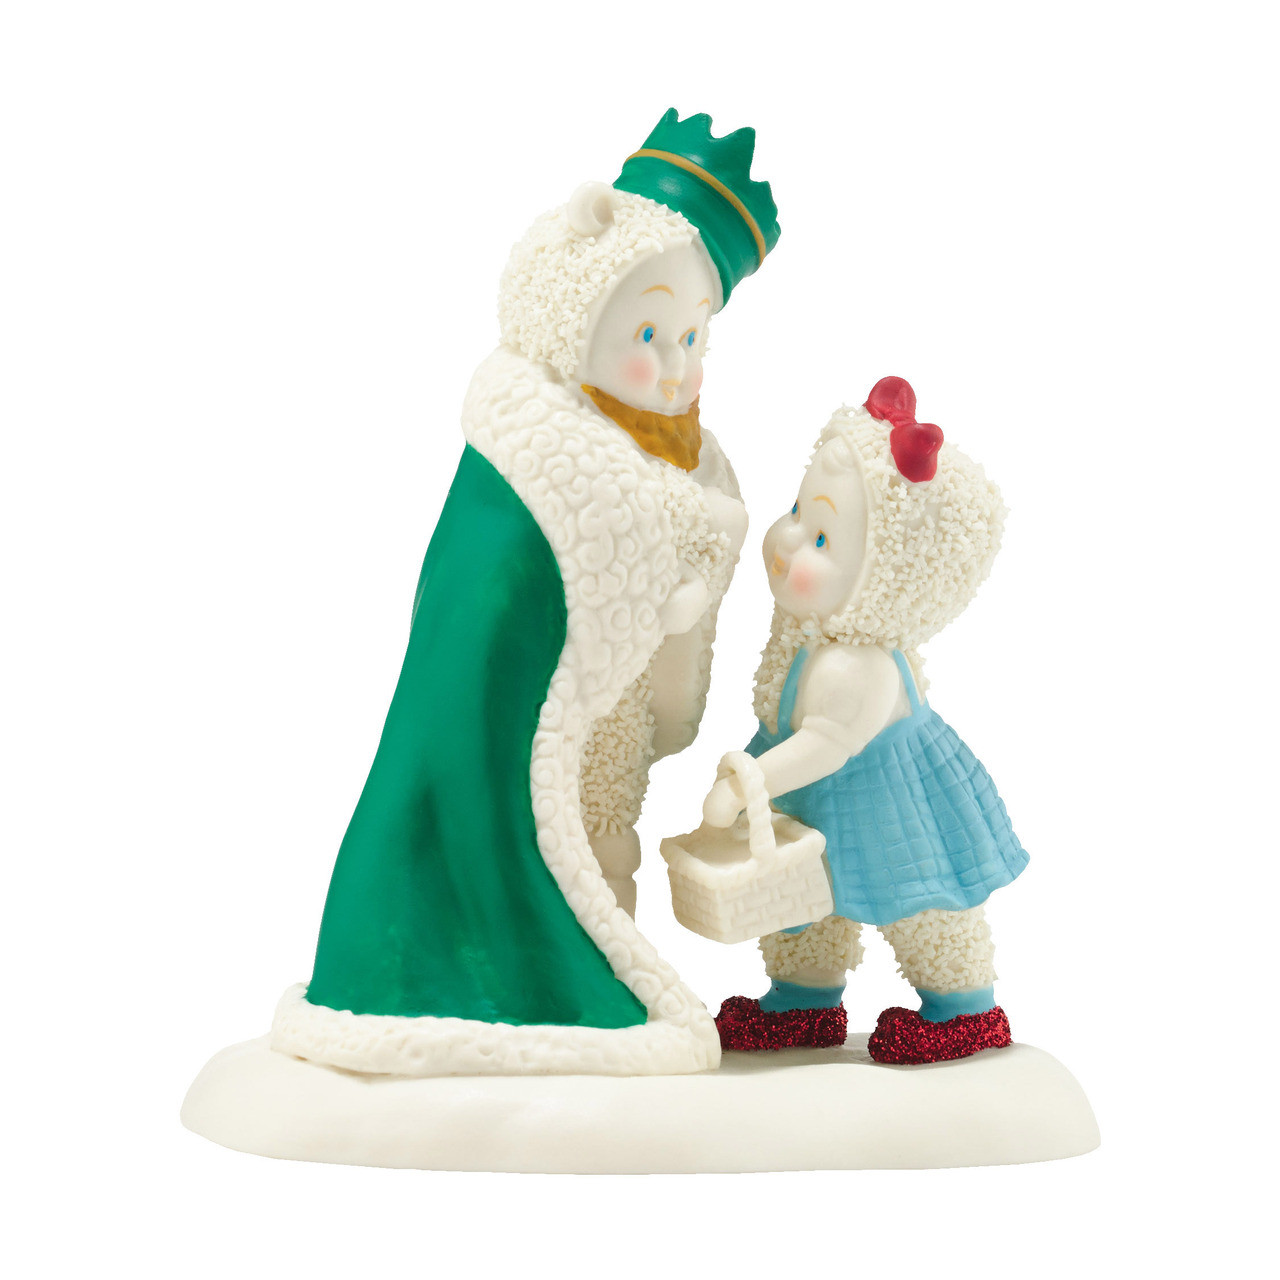 Wizard of Oz Dept. 56 Snowbabies, 4042504 Dorothy, Lion King of the Forest 